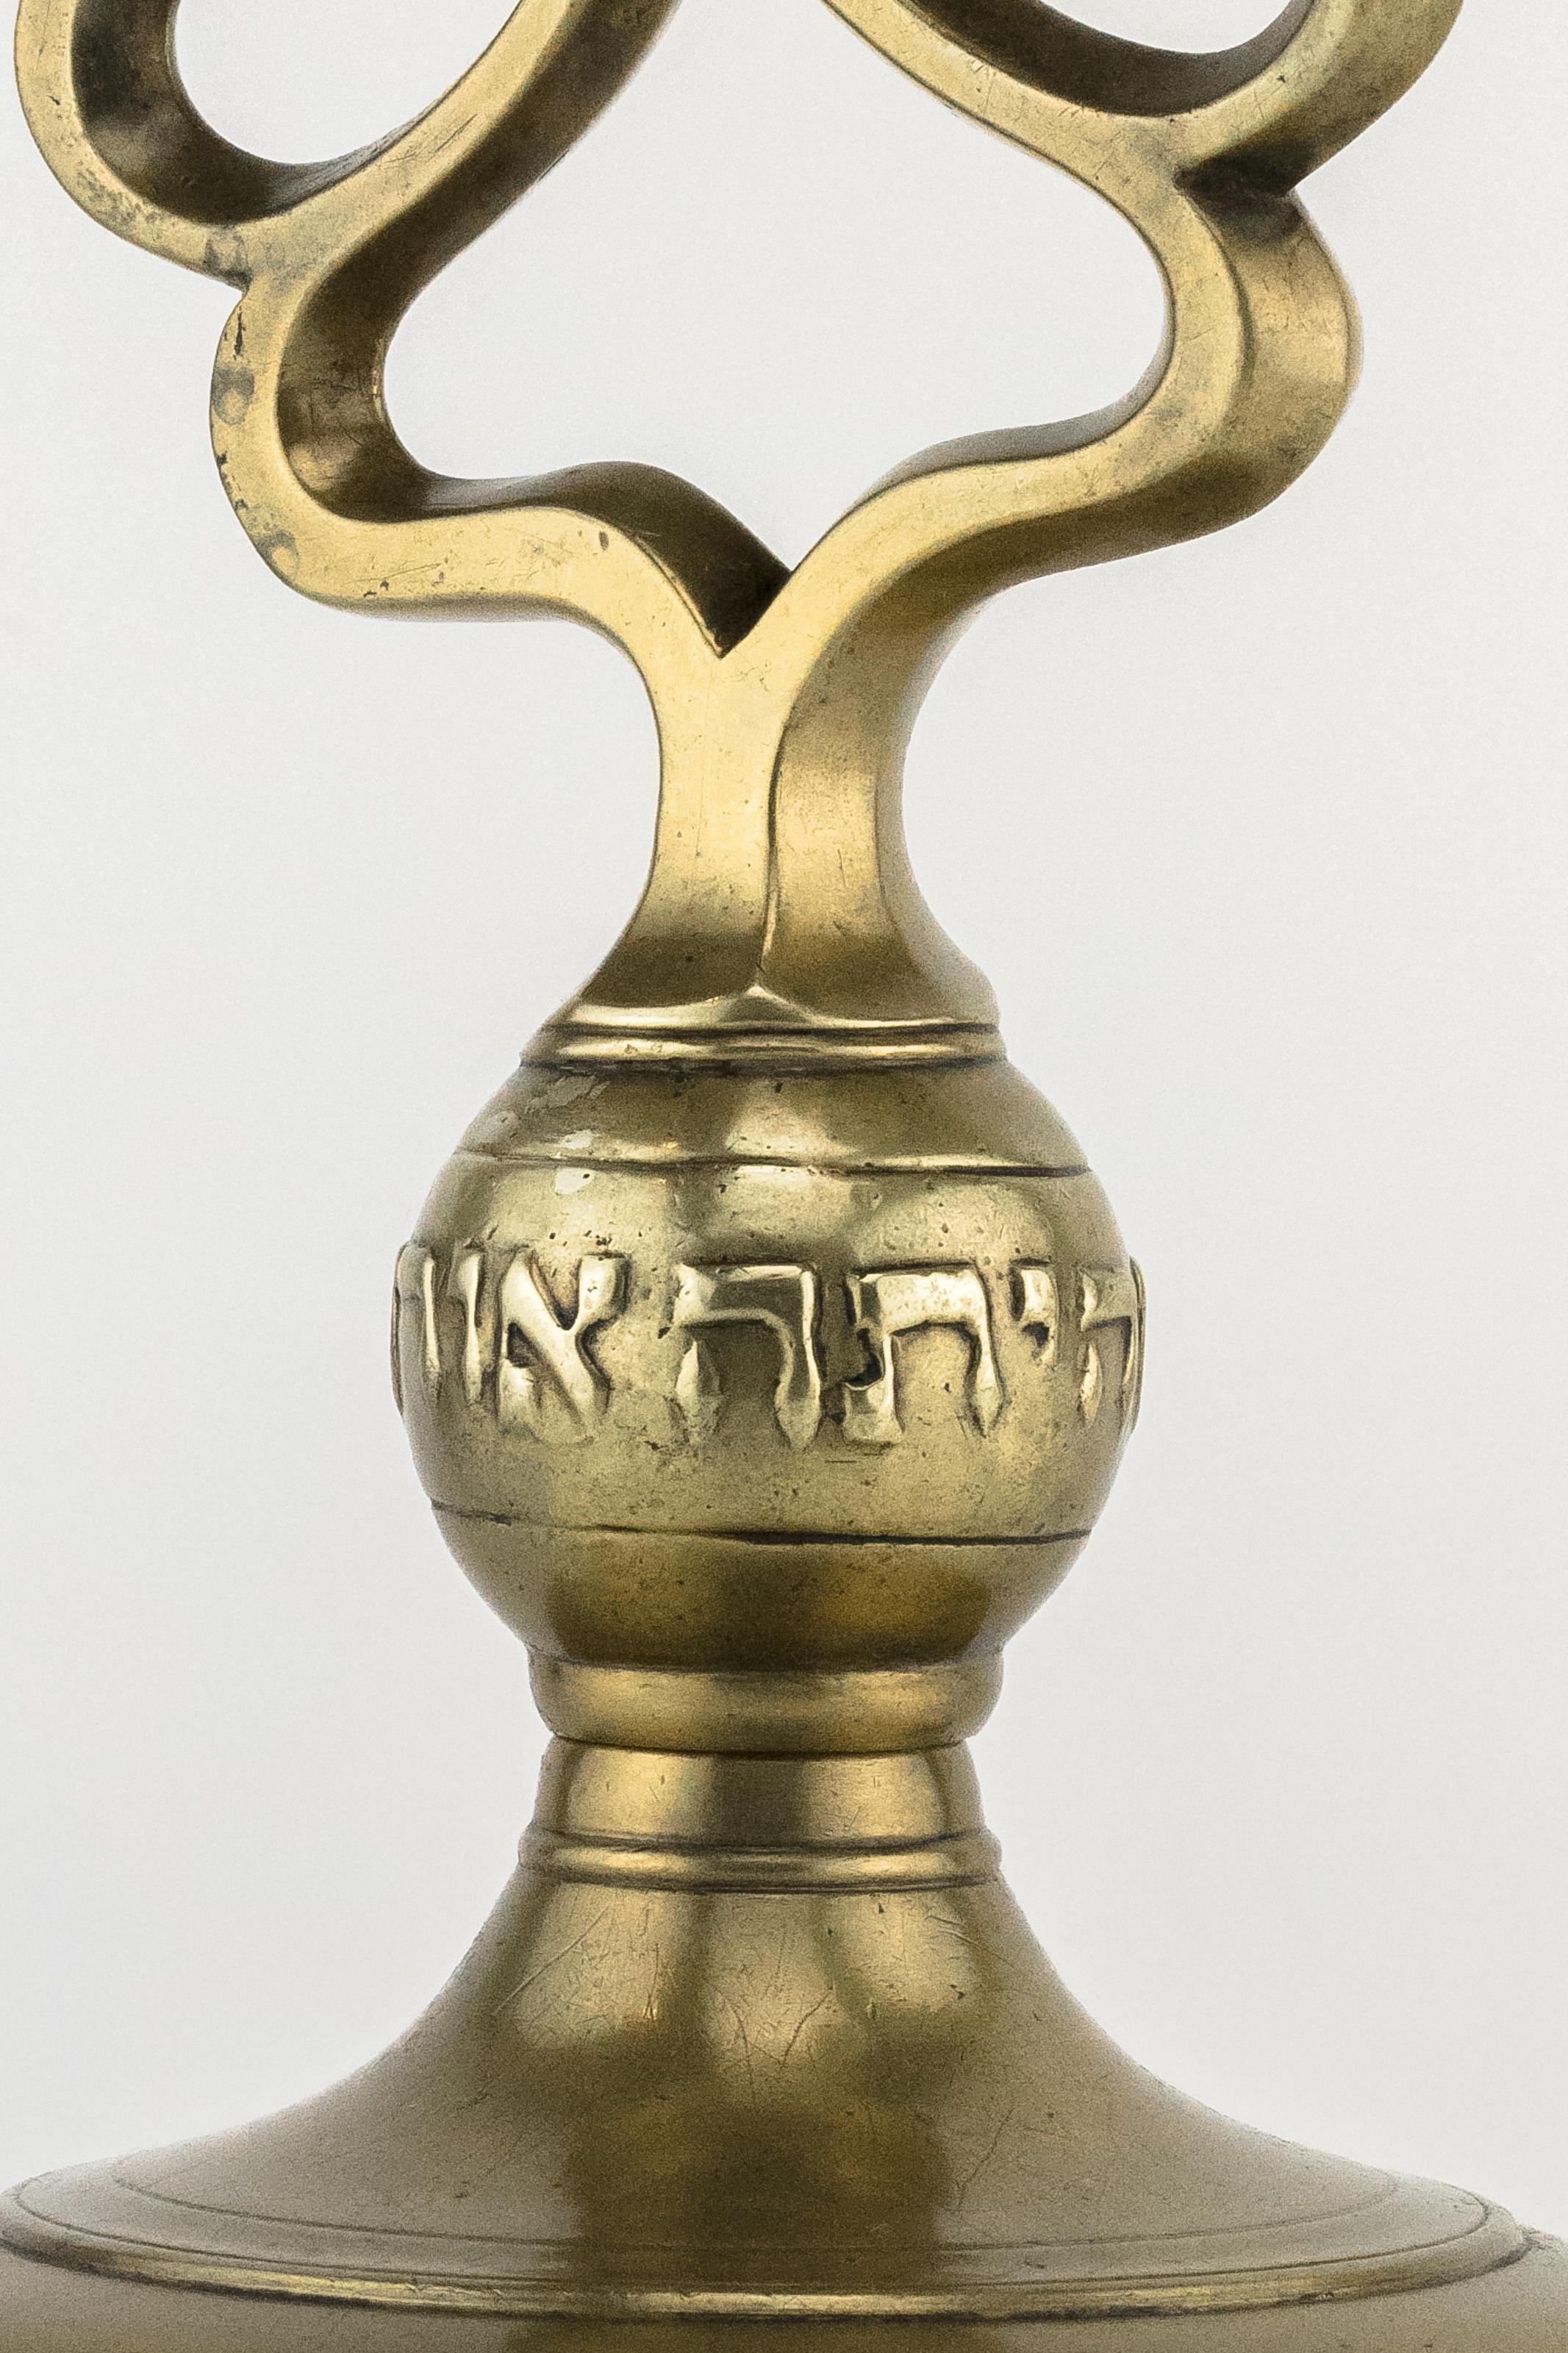 Rare and Important Shabbat candelabrum, Brass, Poland, circa 1750.
On the shaft there is a Hebrew inscription cast in relief, which translate as 